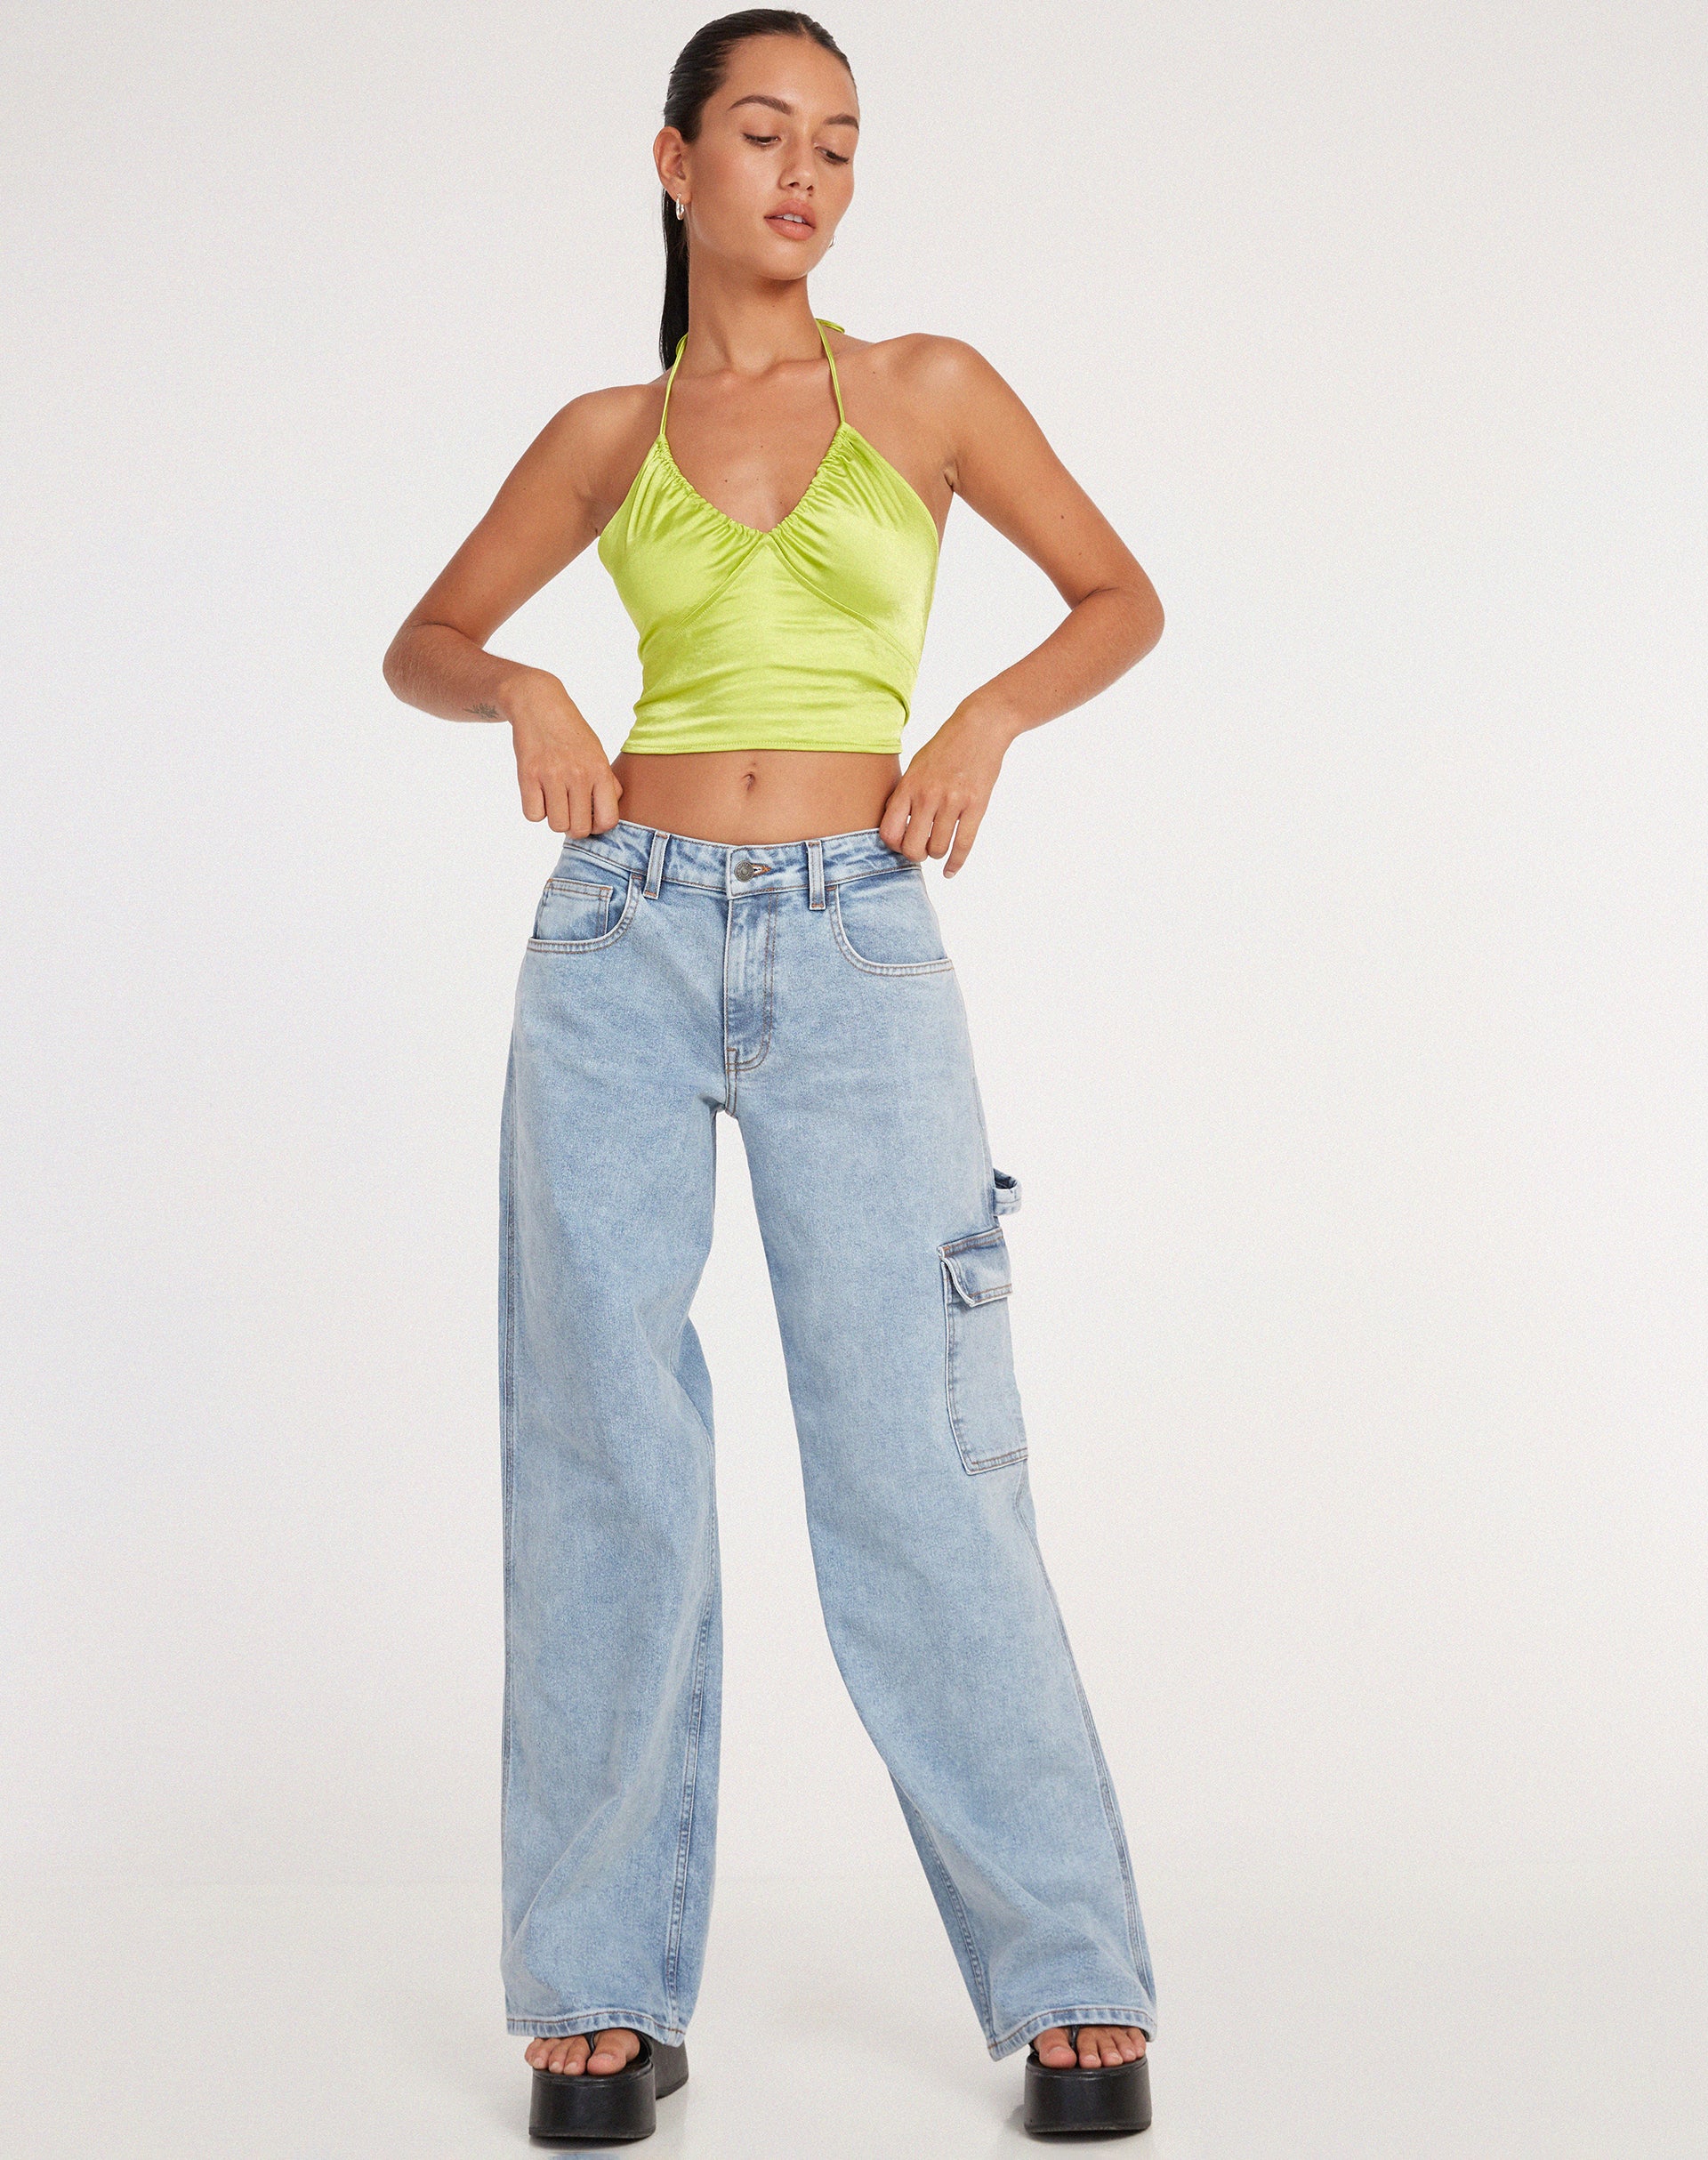 image of Haltri Crop Top in Satin Lime Green